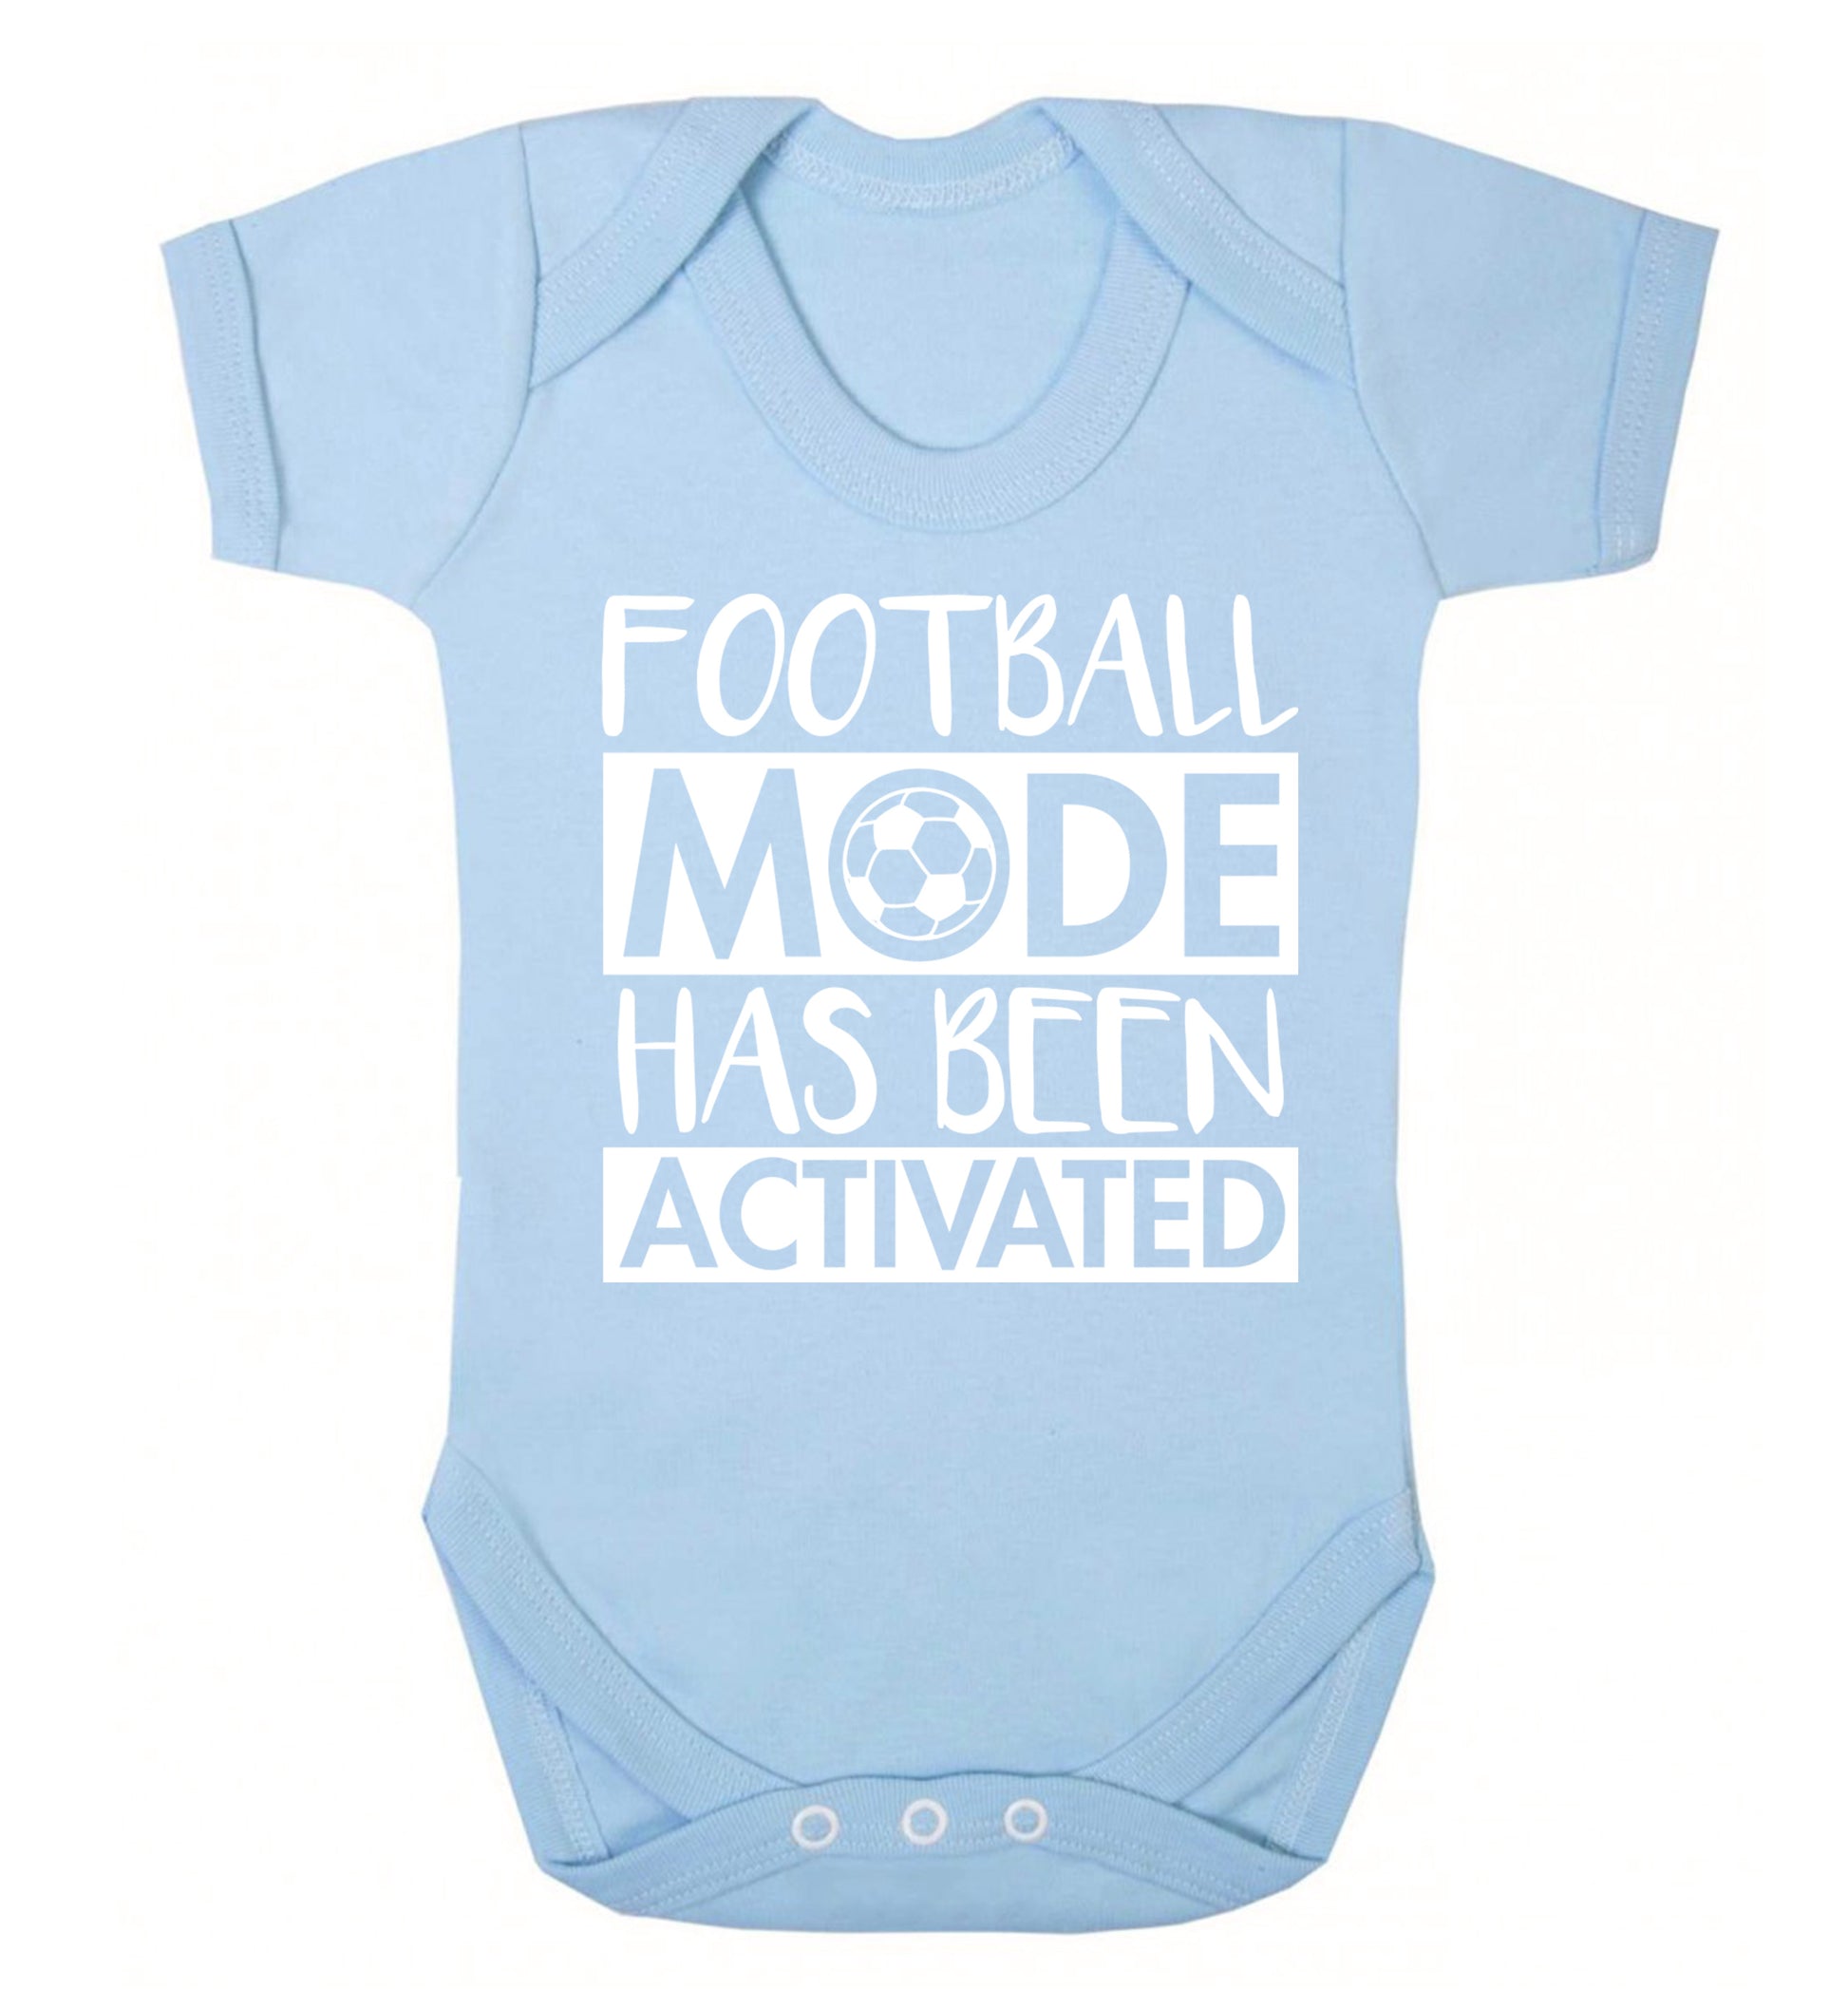 Football mode has been activated Baby Vest pale blue 18-24 months